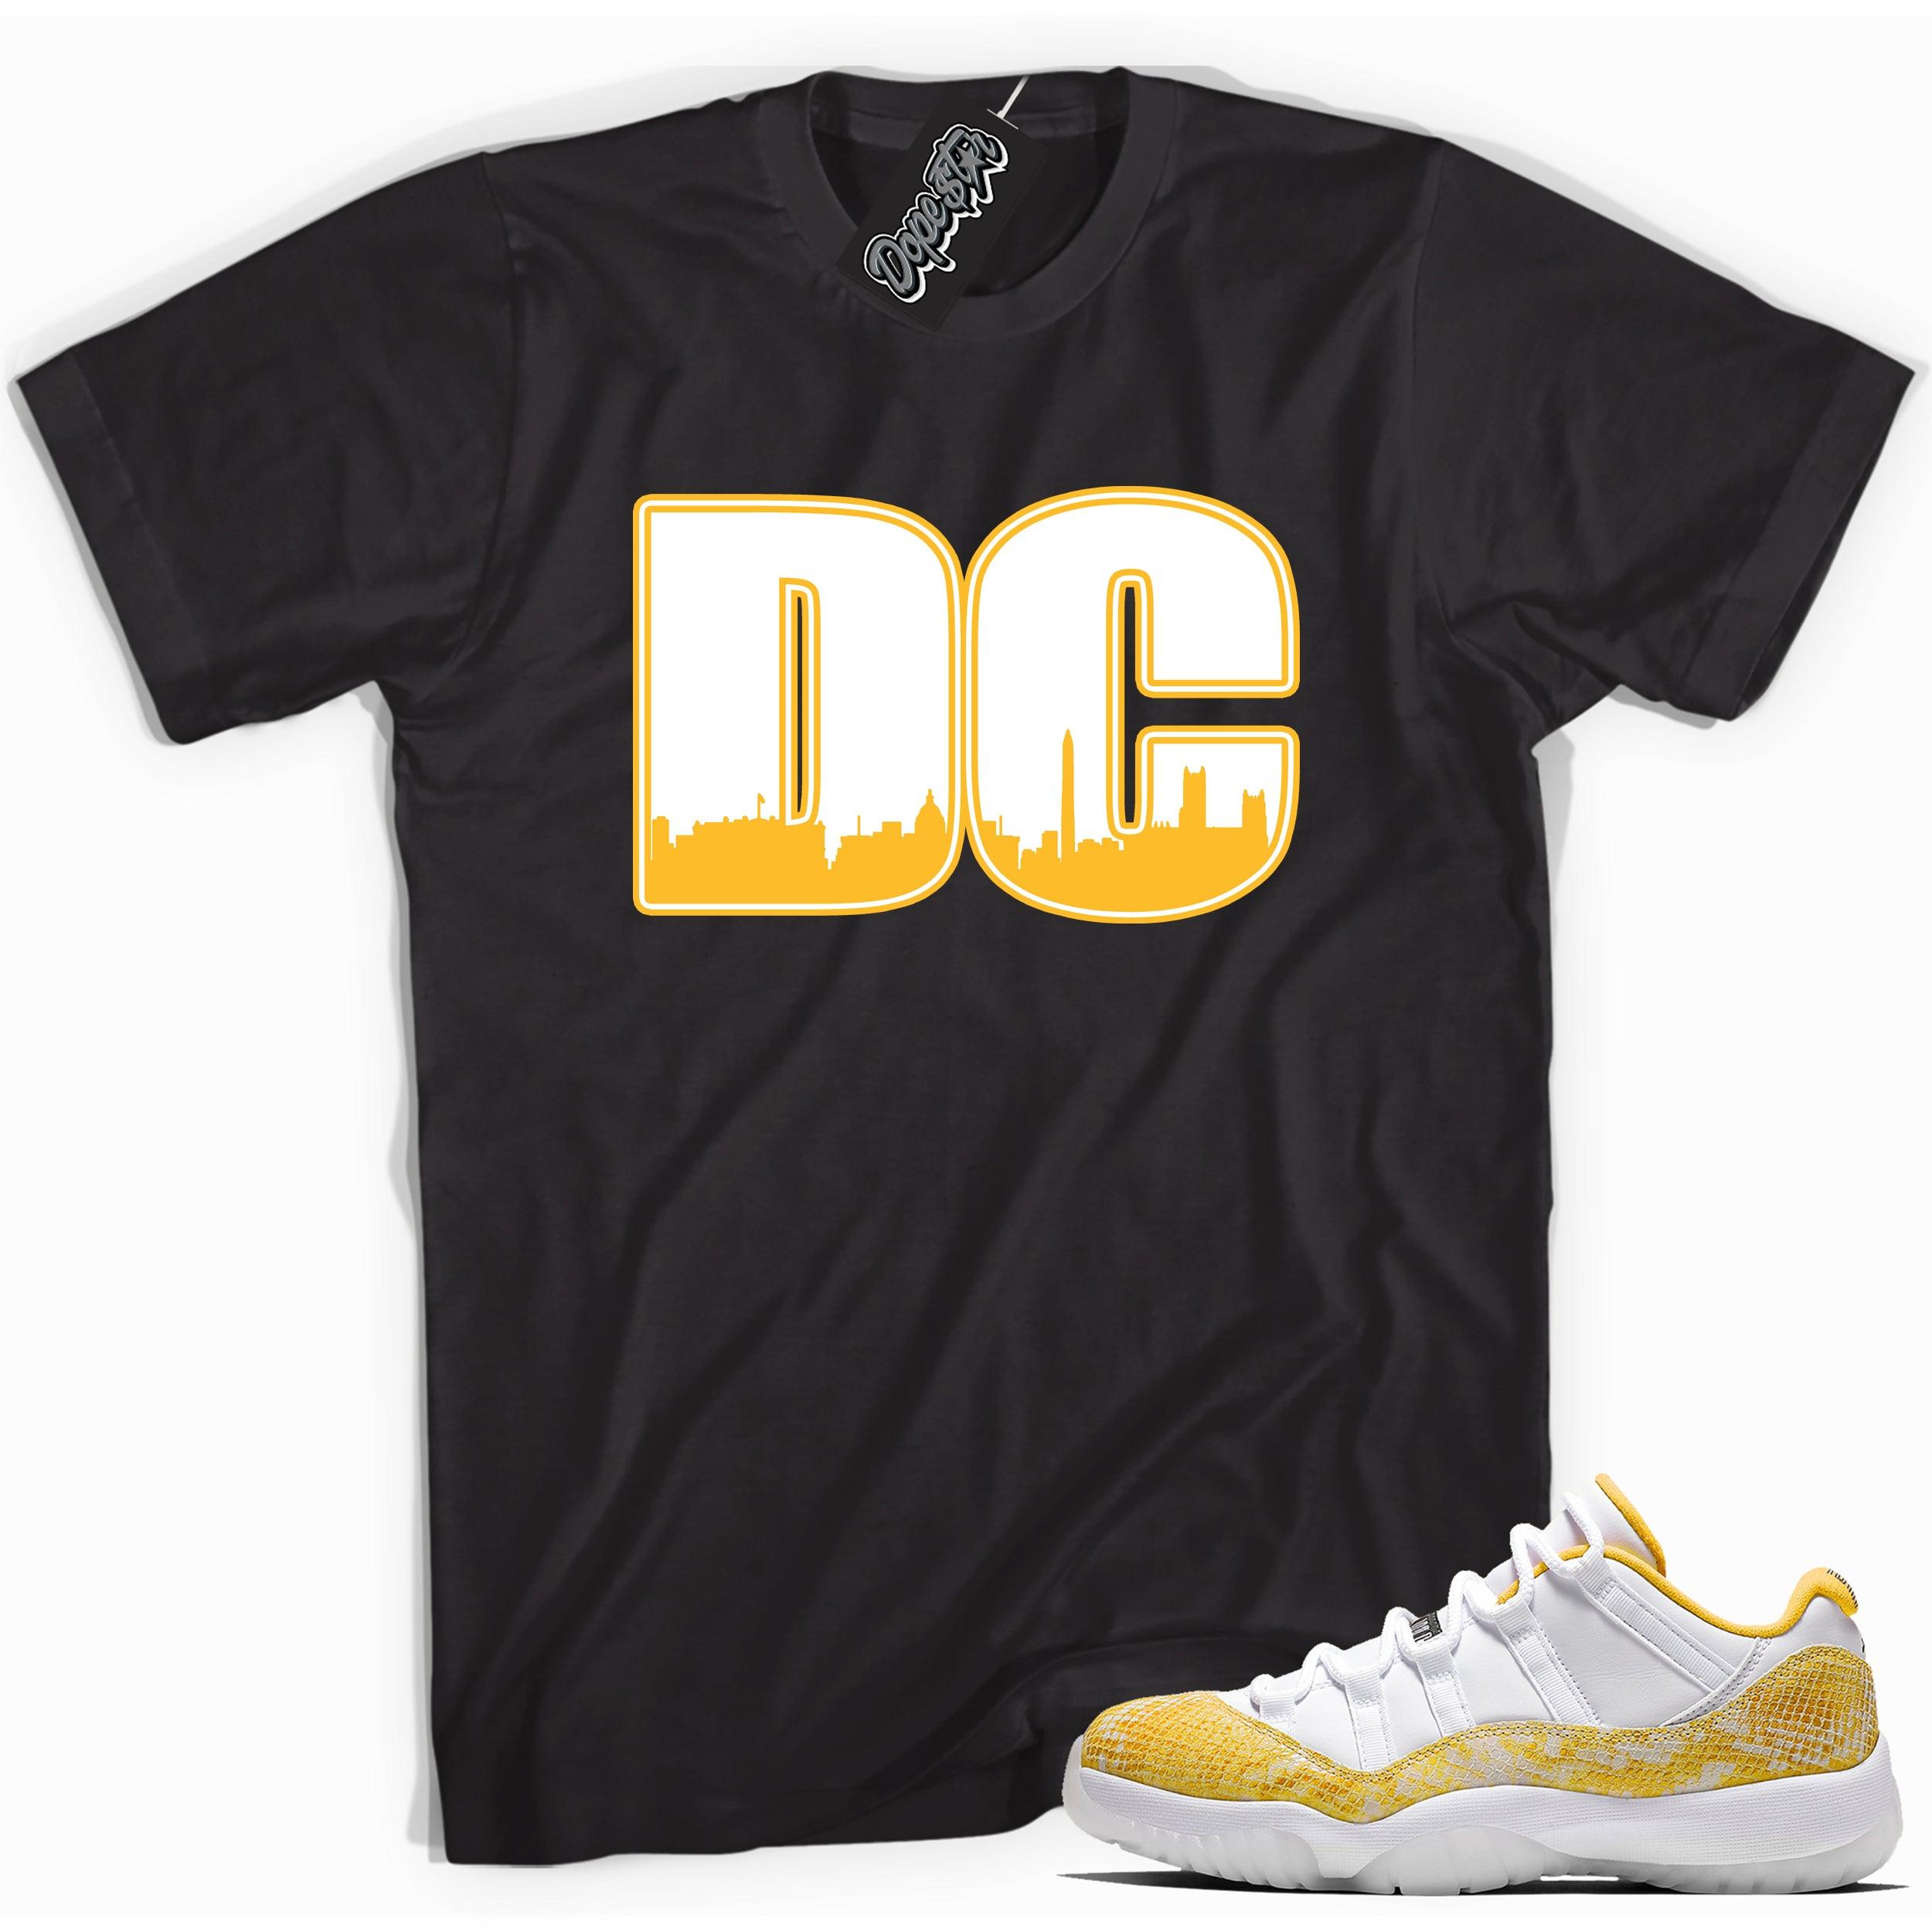 Cool black graphic tee with 'dc' print, that perfectly matches  Air Jordan 11 Low Yellow Snakeskin sneakers